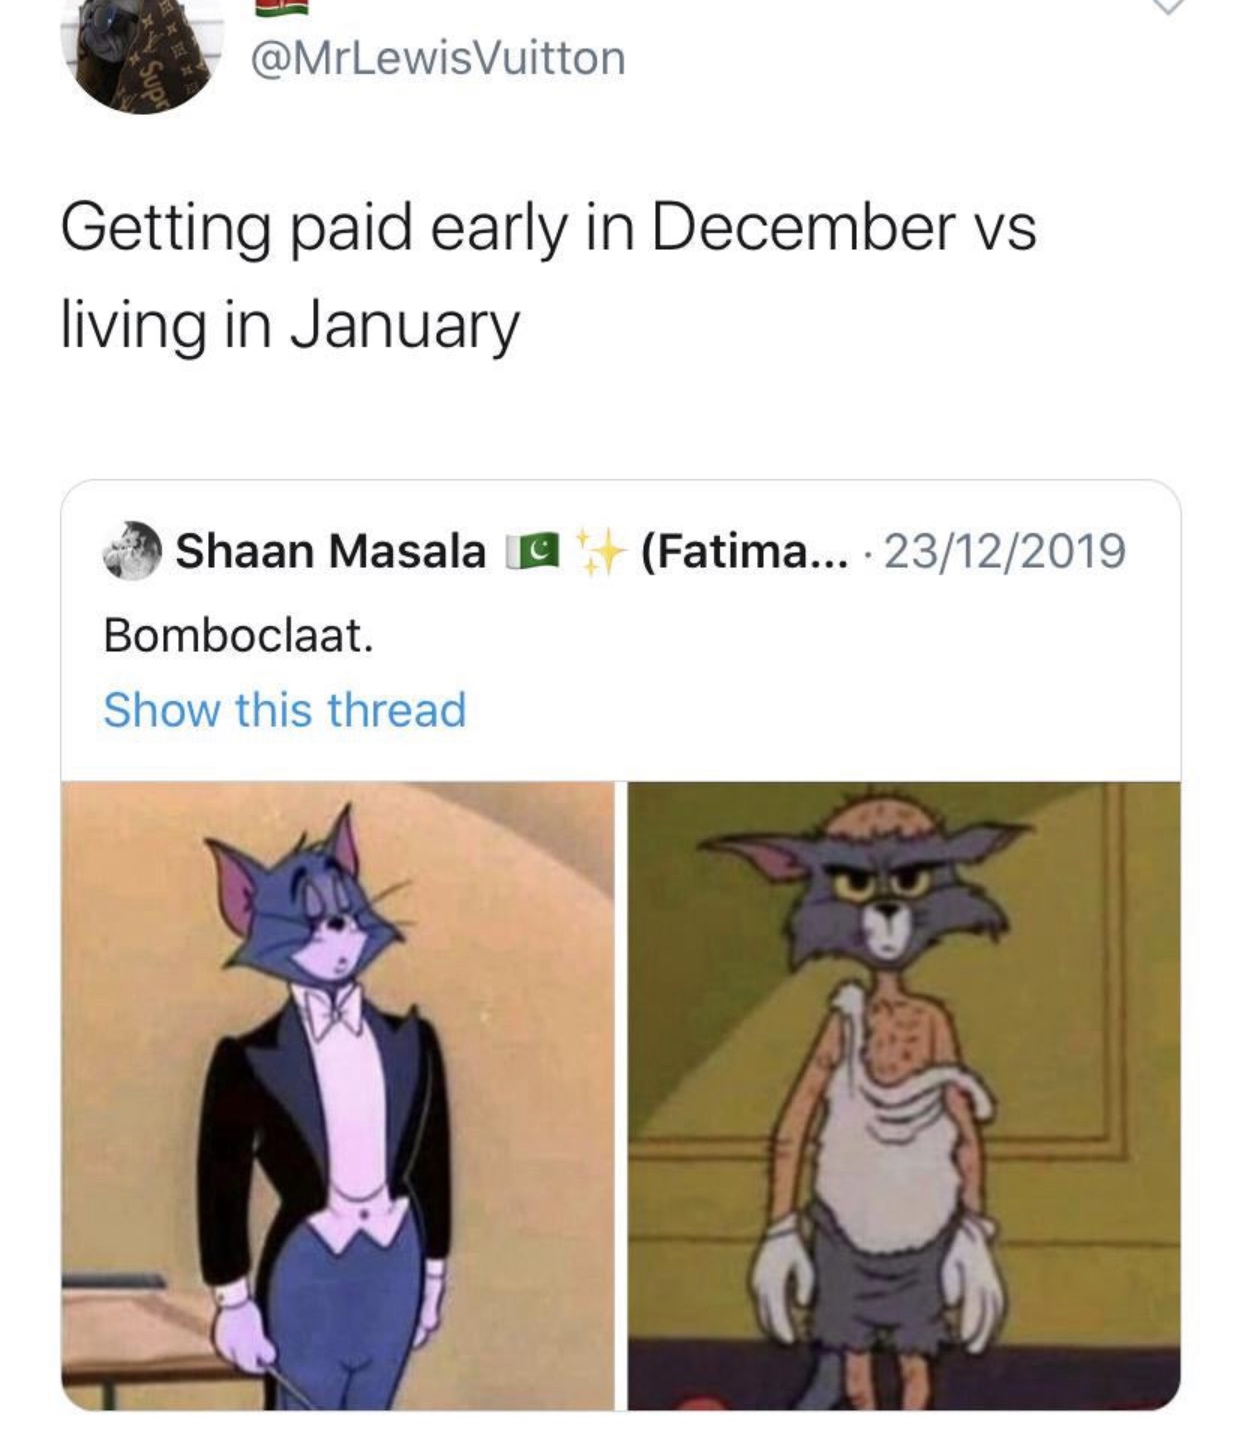 Internet meme - Vuitton Getting paid early in December vs living in January Fatima.... 23122019 Shaan Masala @ Bomboclaat. Show this thread